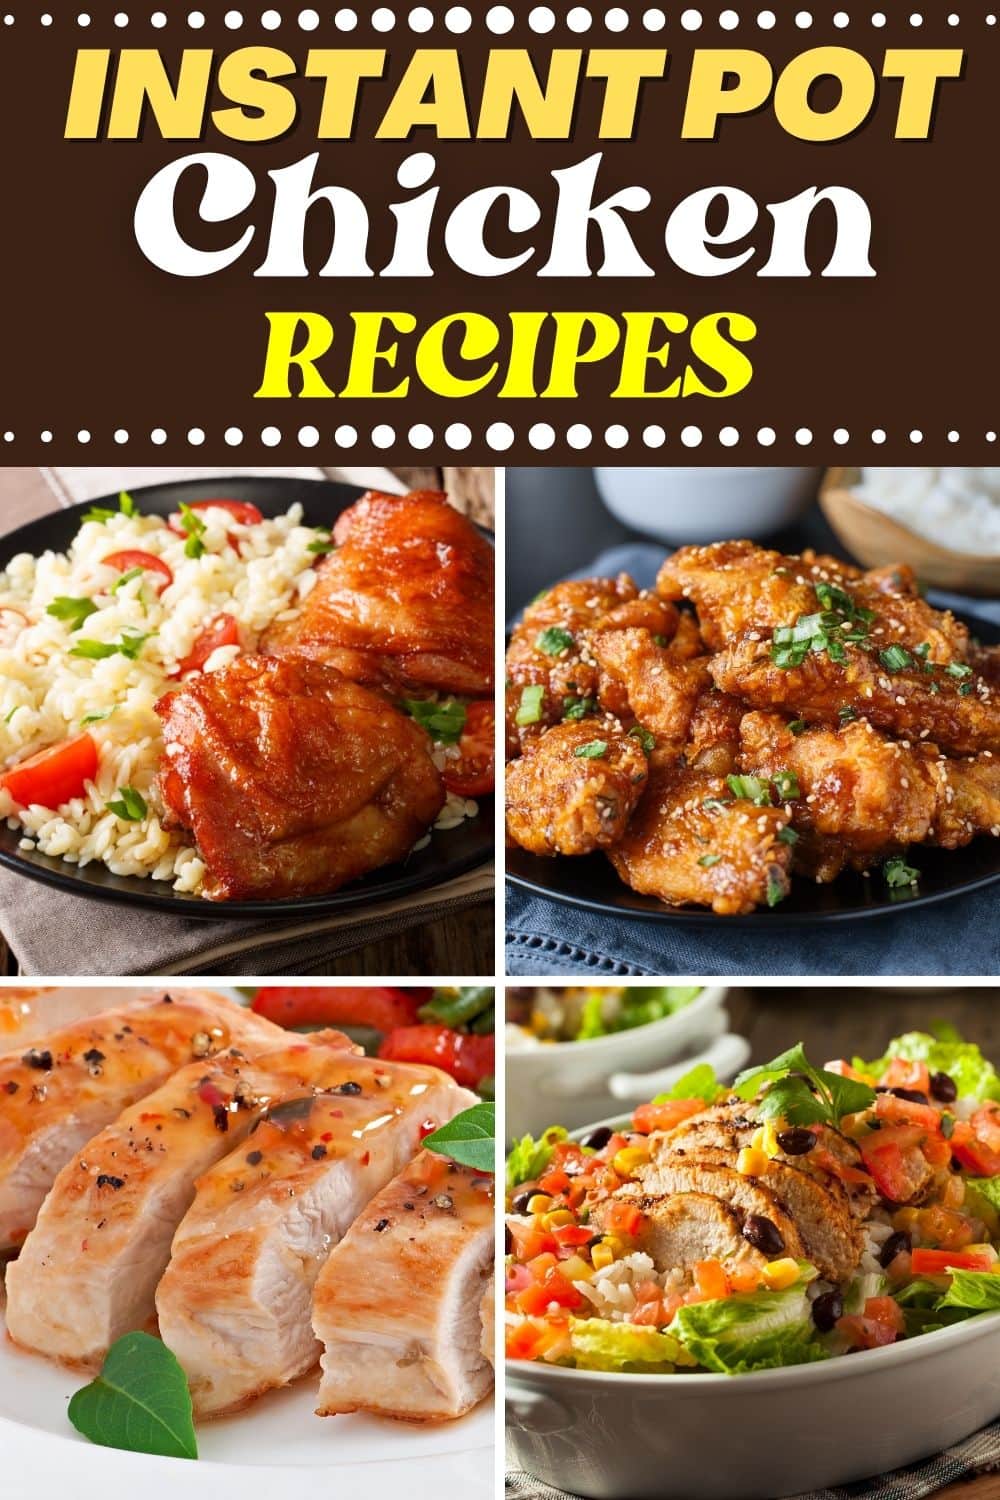 30 Simple Instant Pot Chicken Recipes - Insanely Good